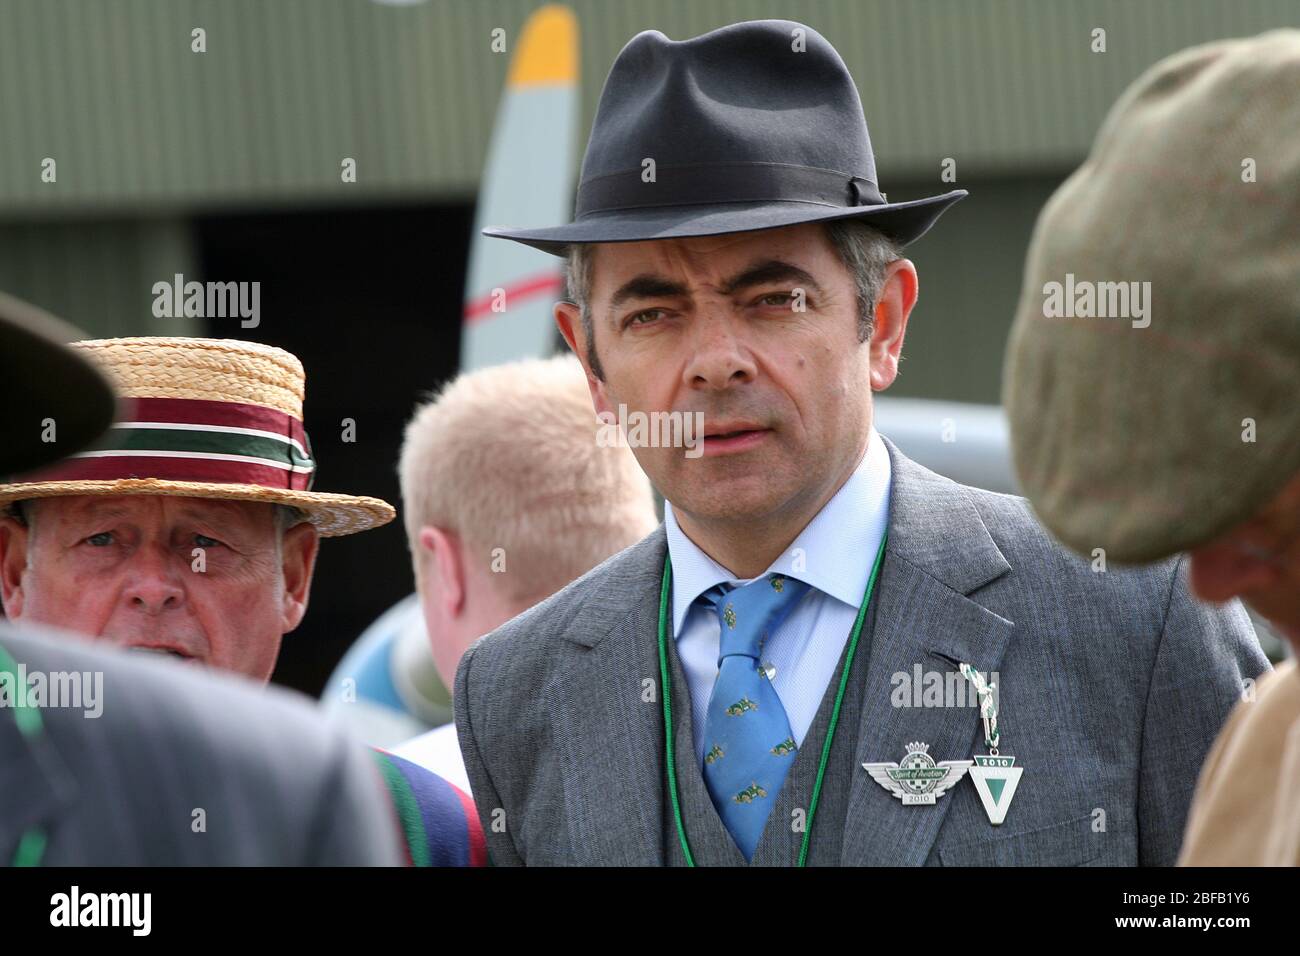 2010 GOODWOOD Revival - Aviation concours judged by Rowan Atkinson Stock Photo